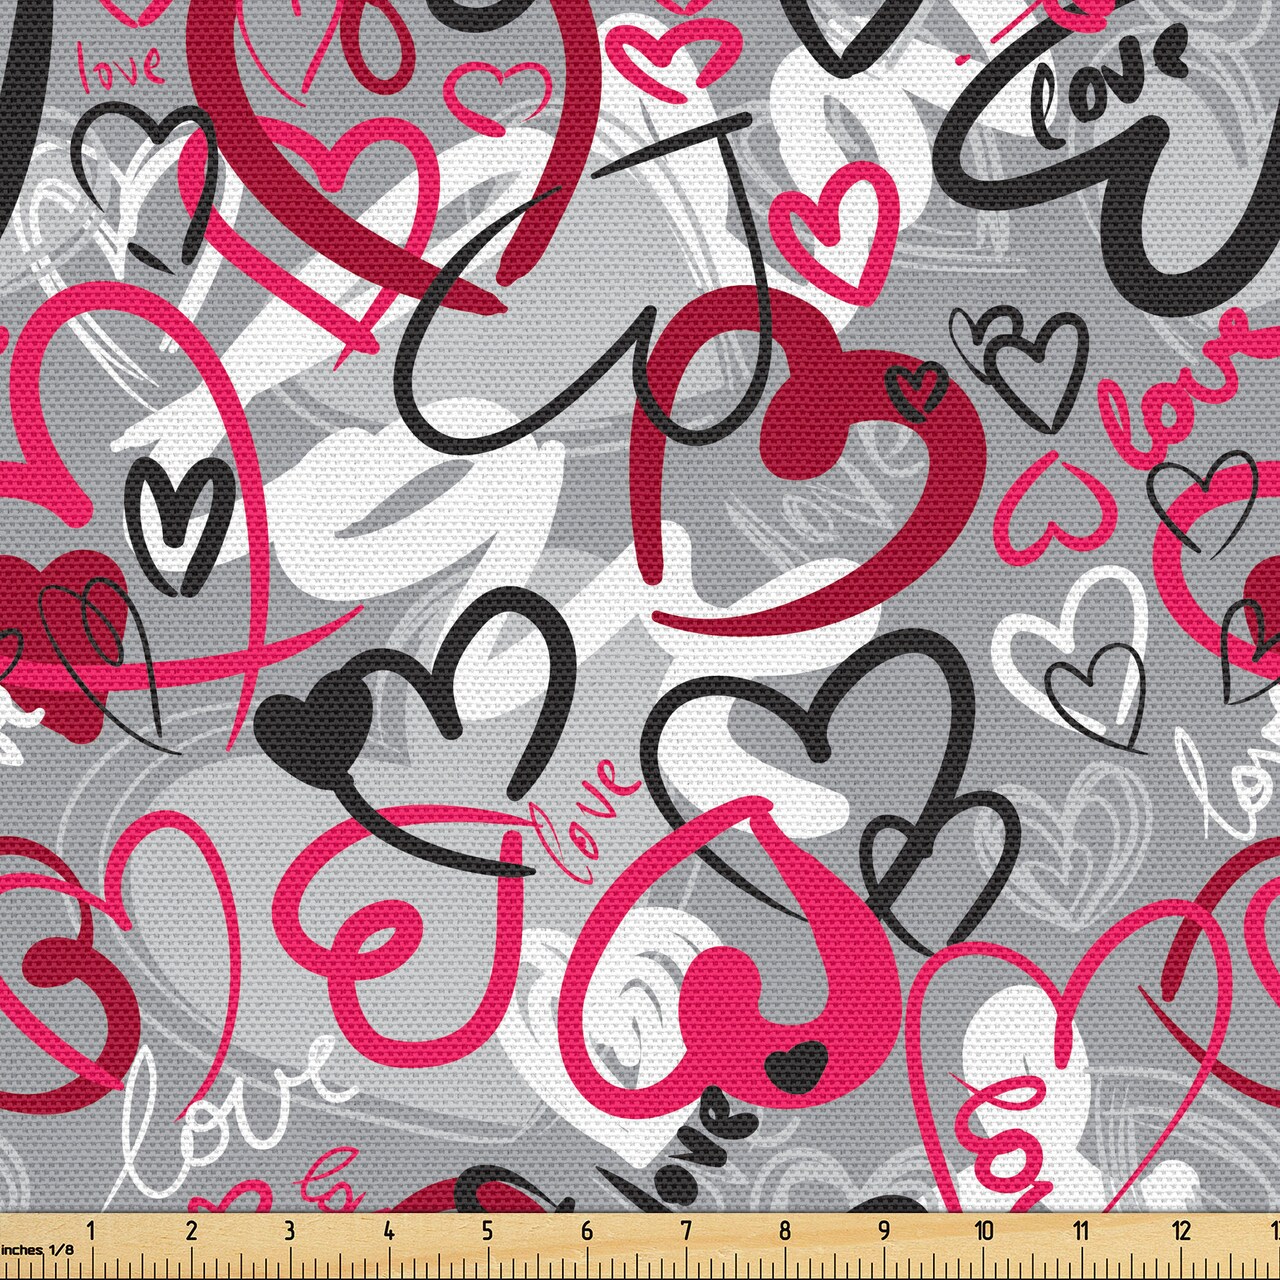 Ambesonne Love Fabric by the Yard, Romantic Random Hand Drawn Style Hearts and Love Words Crazy Romance Valentines, Decorative Fabric for Upholstery and Home Accents, Red Grey